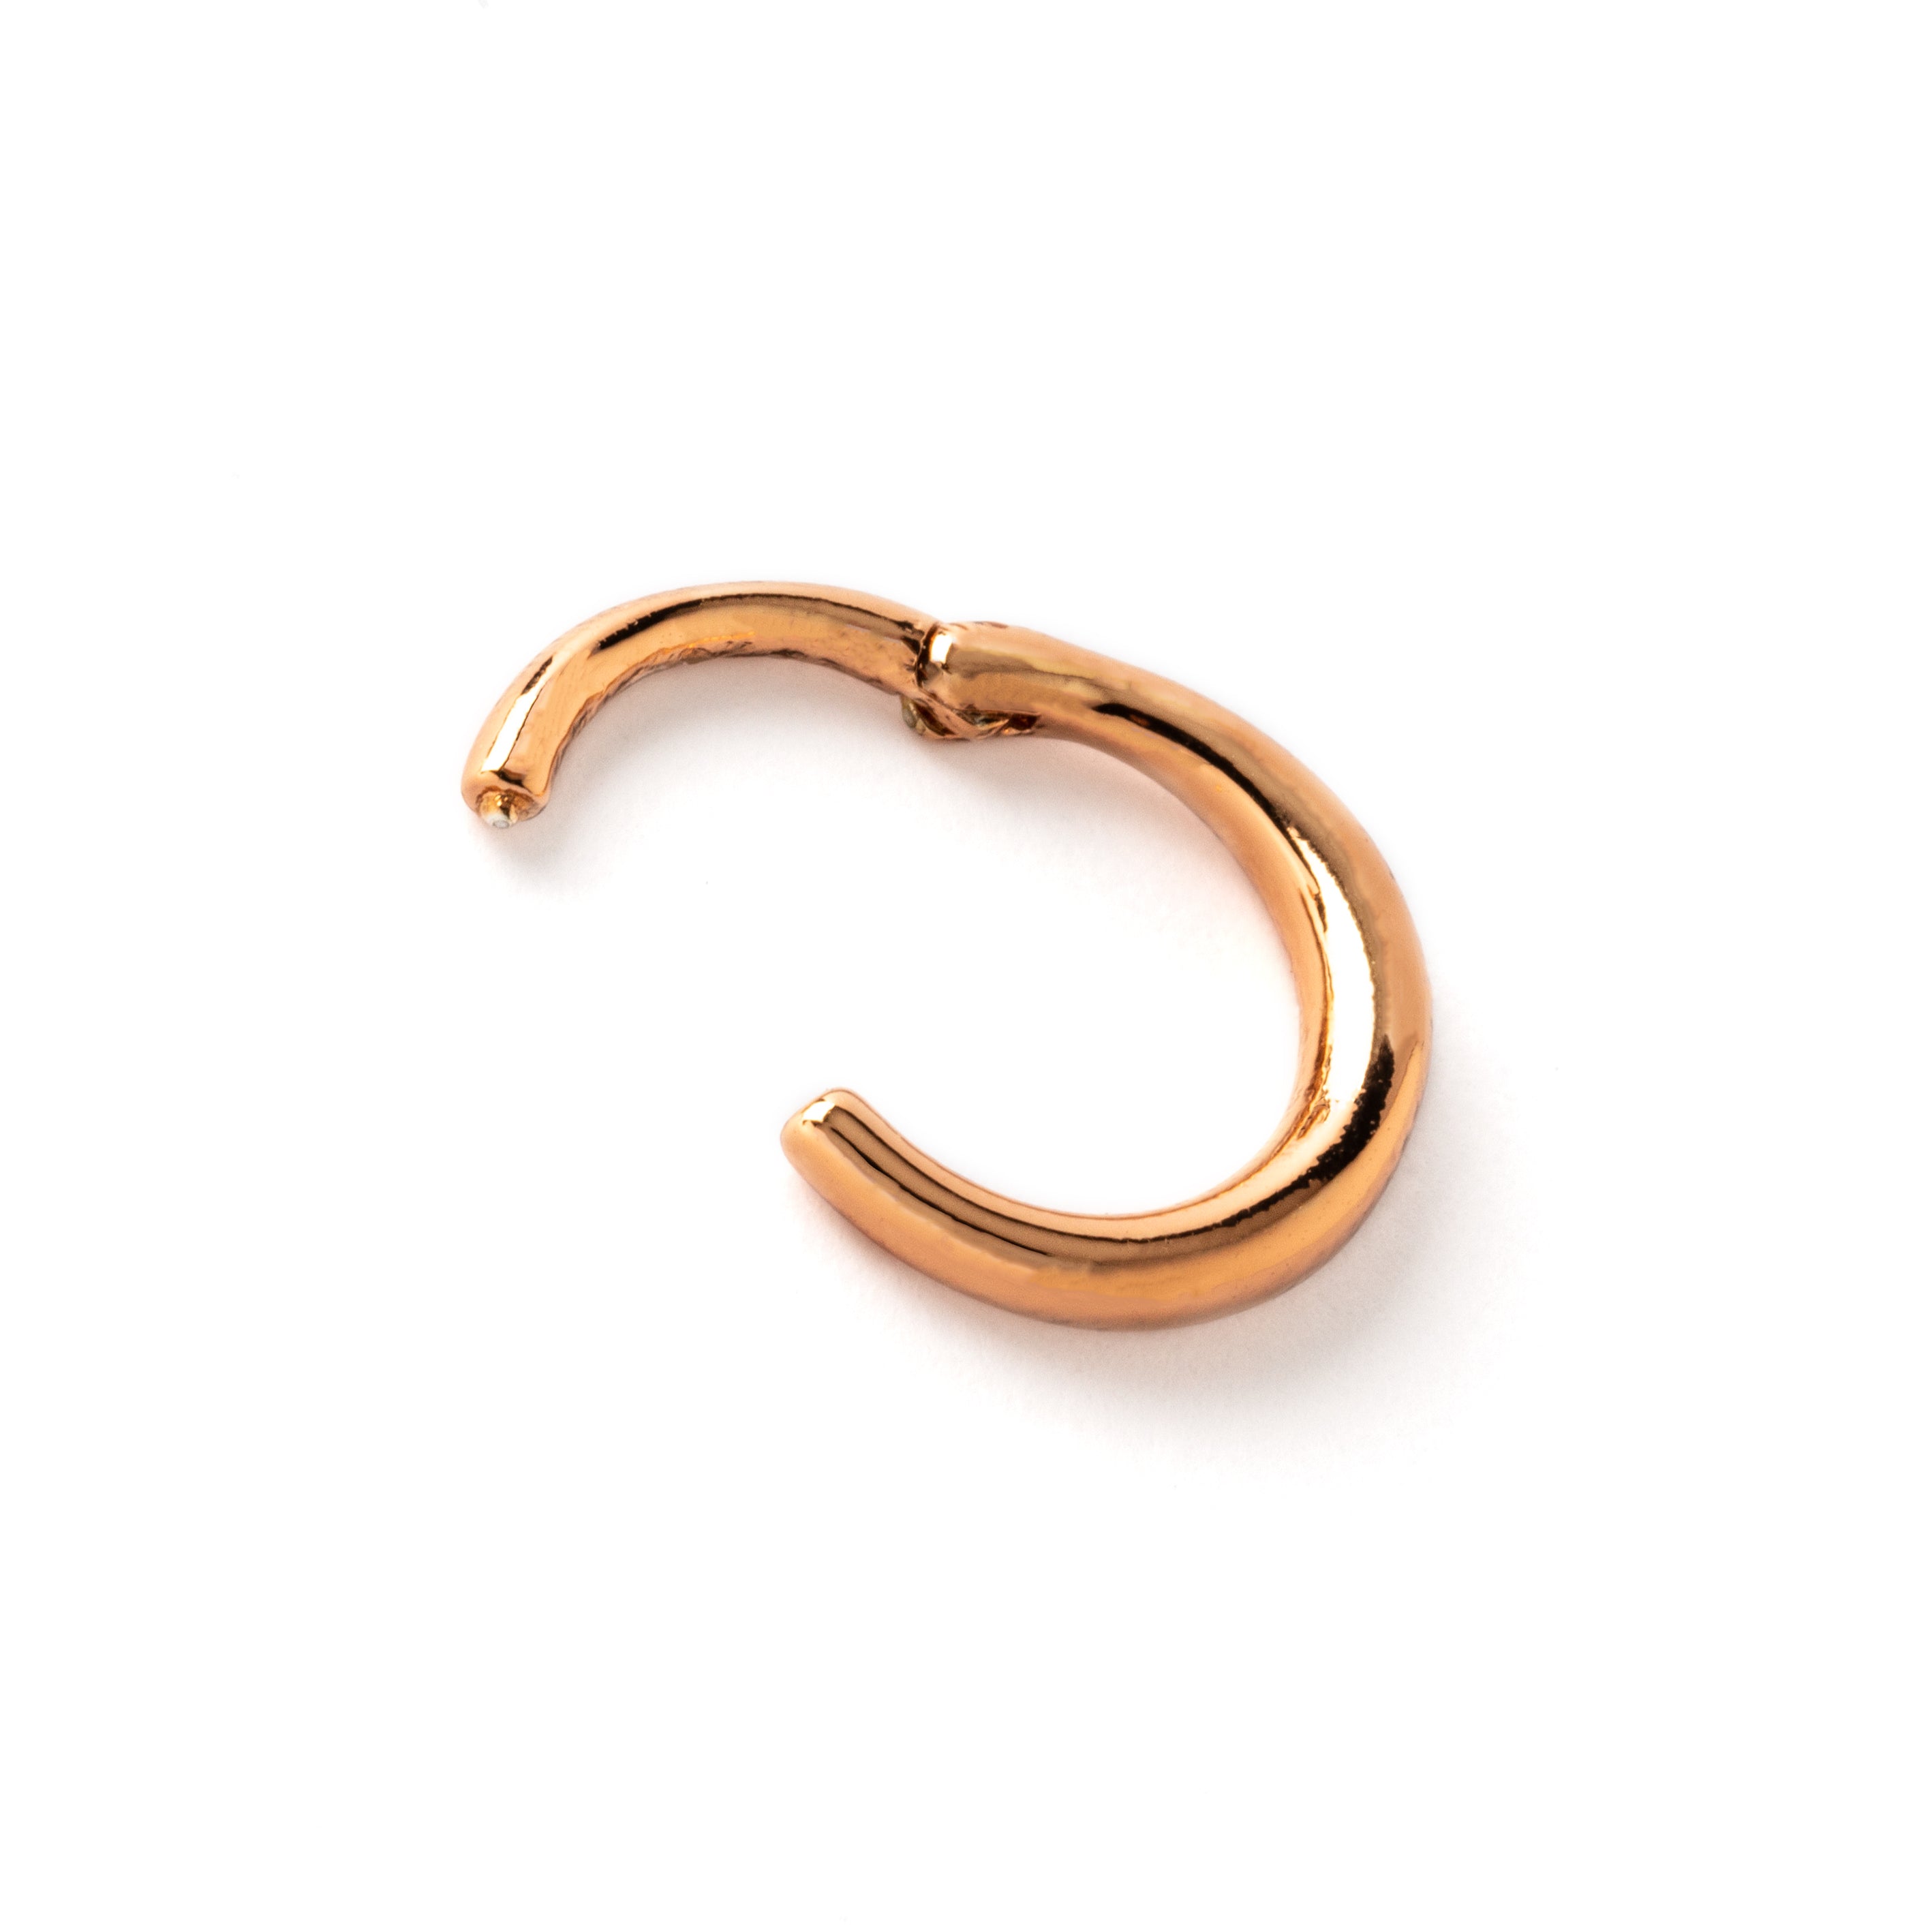 Raja rose gold surgical steel septum clicker ring hinged segment view